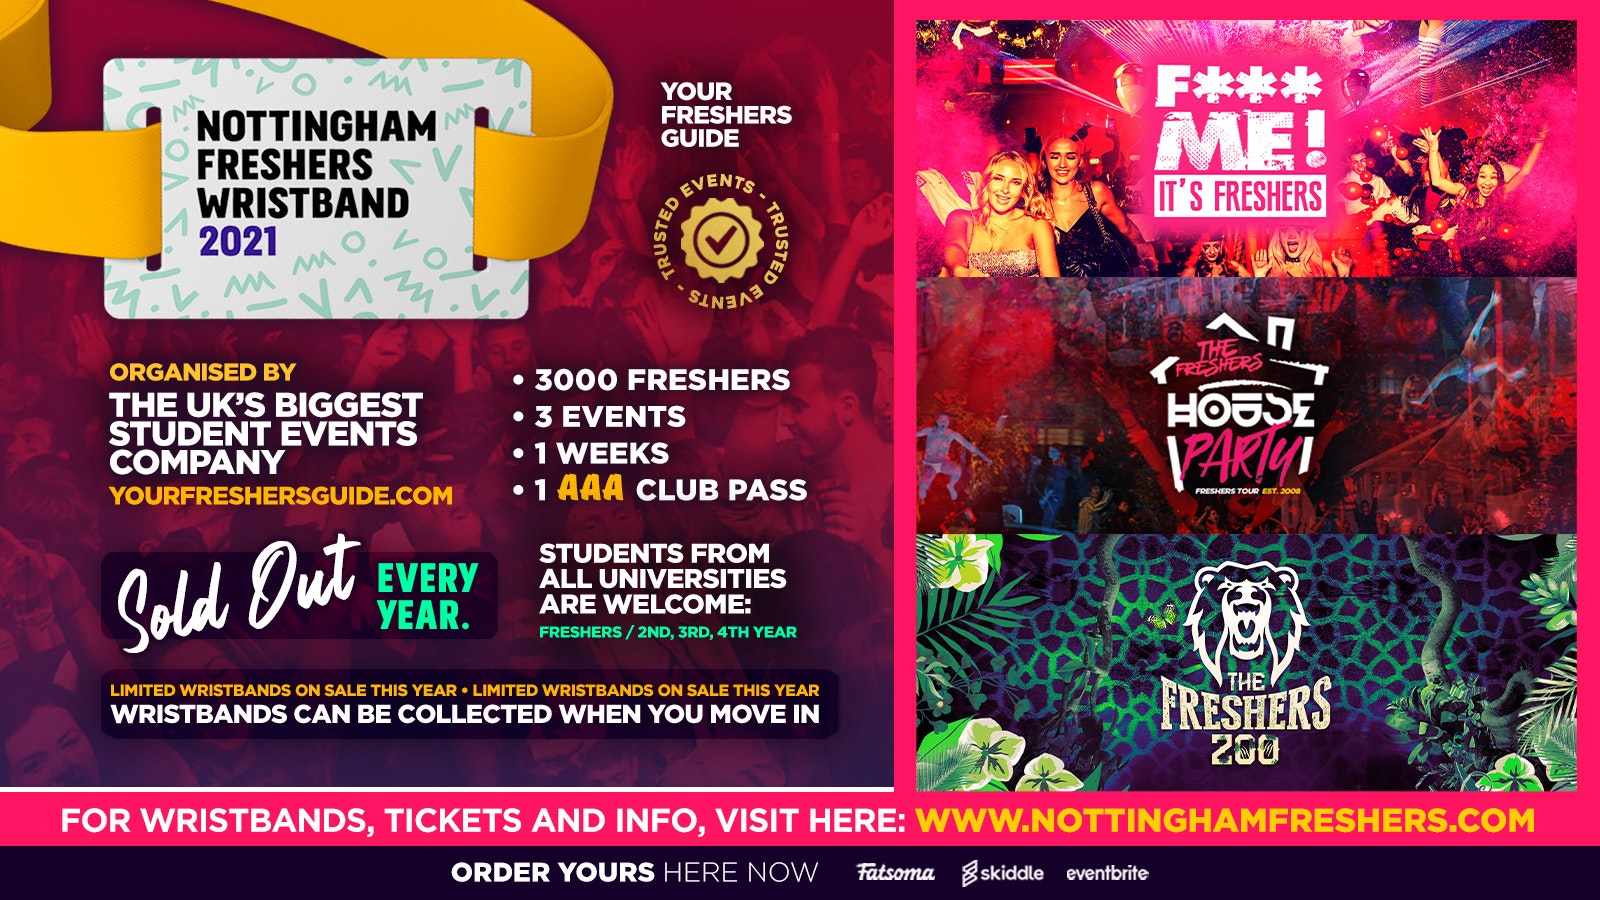 Nottingham Freshers Wristband 2021 – The Official Freshers Pass | Includes the biggest events in Nottingham